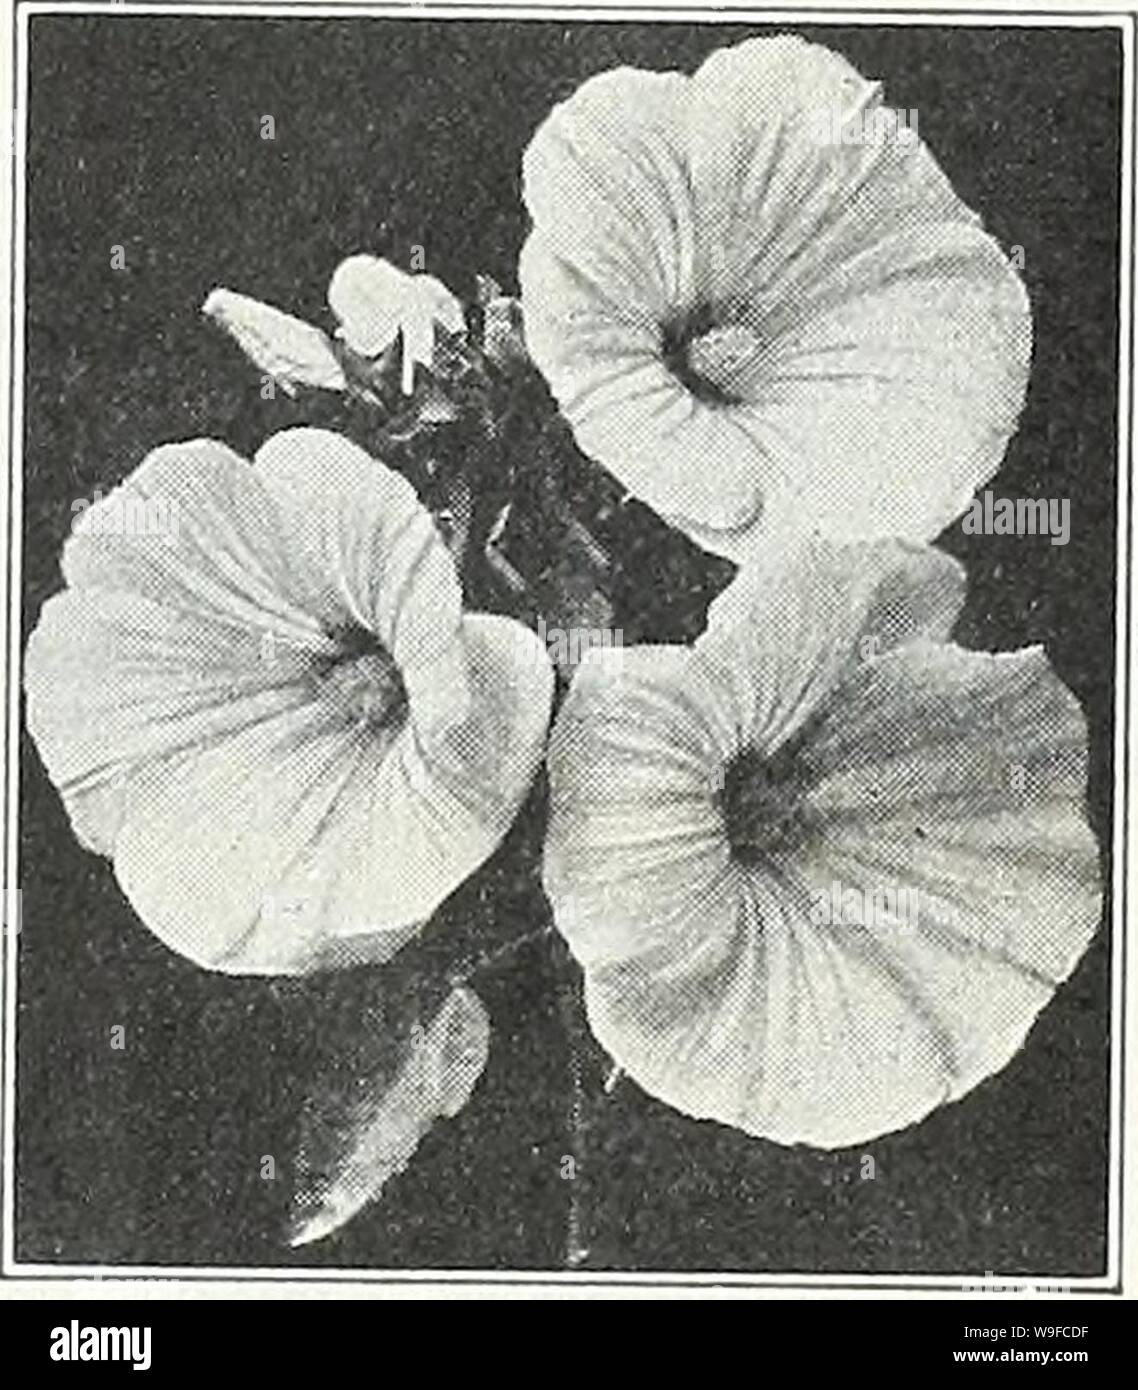 Archive image from page 30 of Currie's garden annual  spring. Currie's garden annual : spring 1934 59th year  curriesgardenann19curr 0 Year: 1934 ( LINUM (Flax) Free-Flowering, Pretty Plants Grandiflorum Coccineum—A beauti- ful dwarf annual, with crimson flow- ers Pkt. 10c PERENNIAL LINUM (See page 51) LEPTOSIPHON Free flowering dwarf hardy an- nuals bearing bright flowers profuse- ly in many colors, suitable for edging or rock work. Finest Mixed Pkt. 10c LOPHOSPERMUM SCANDENS—A beautiful climbing annual with rosy-purple flowers Pkt. 10c LOBELIA Pretty Plants for Edging and Vases Bedding Queen Stock Photo